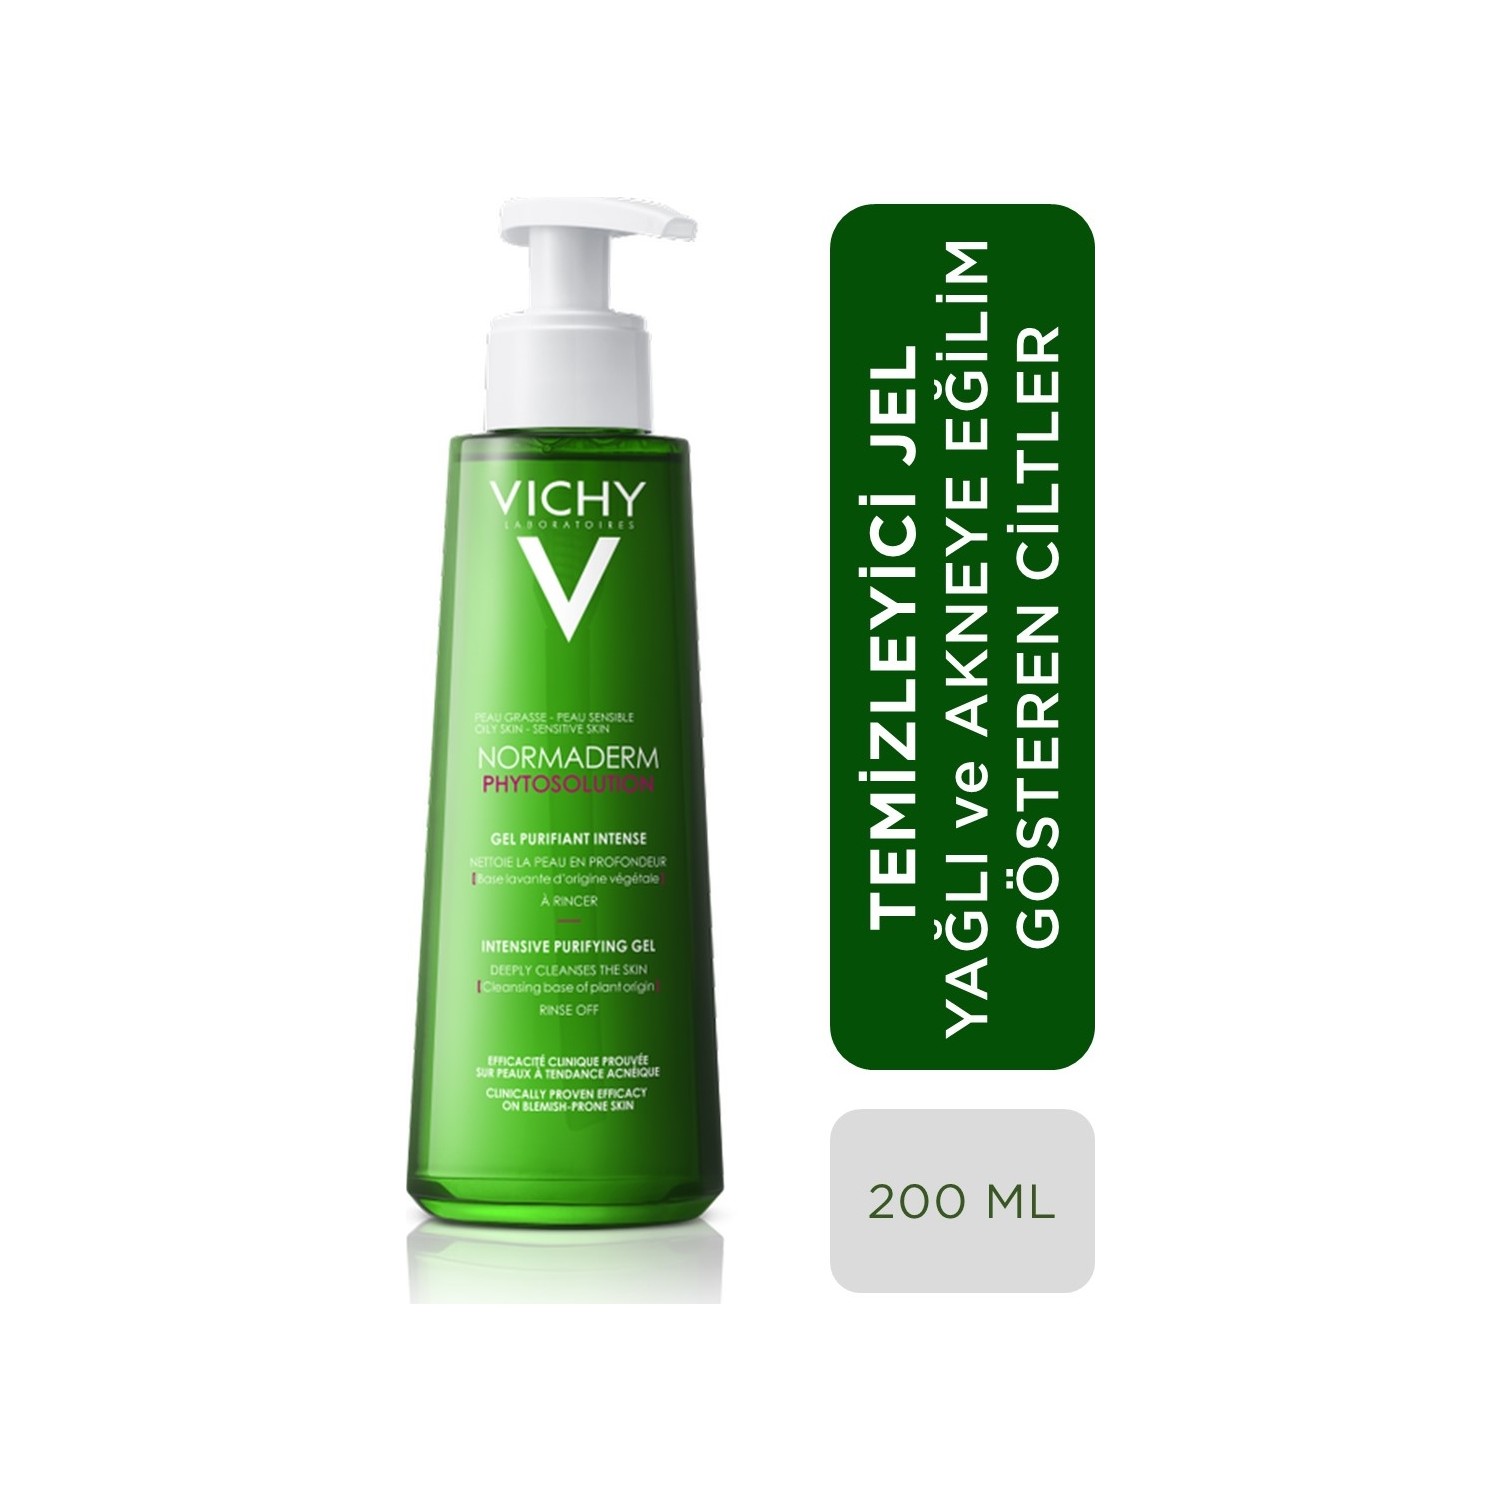 Vichy normaderm phytosolution intensive purifying gel. Vichy Normaderm. Виши Нормадерм phytosolution. Vichy гель Normaderm phytosolution Intensive Purifying Gel, 200 мл. Vichy Normaderm phytosolution гель пробник.